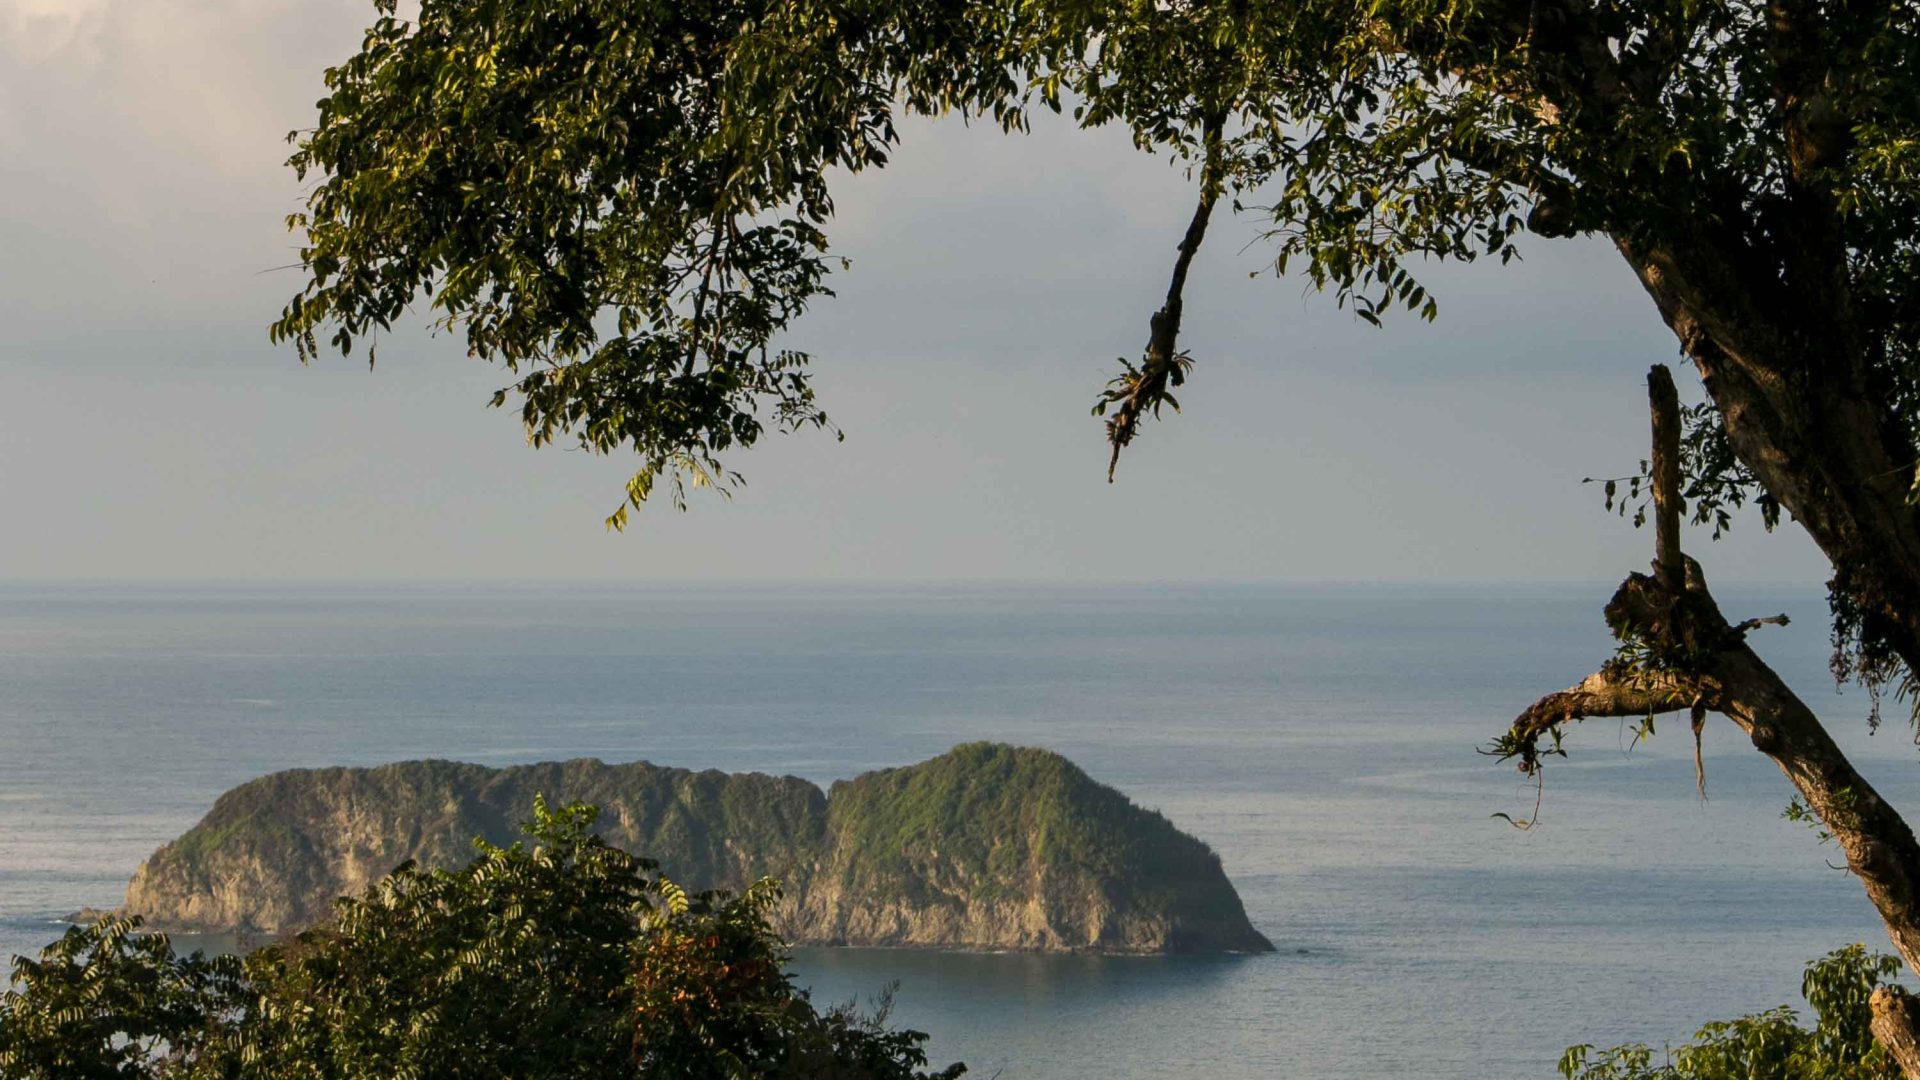 A small island is visible in the water through the trees. Manuel Antonio National Park.